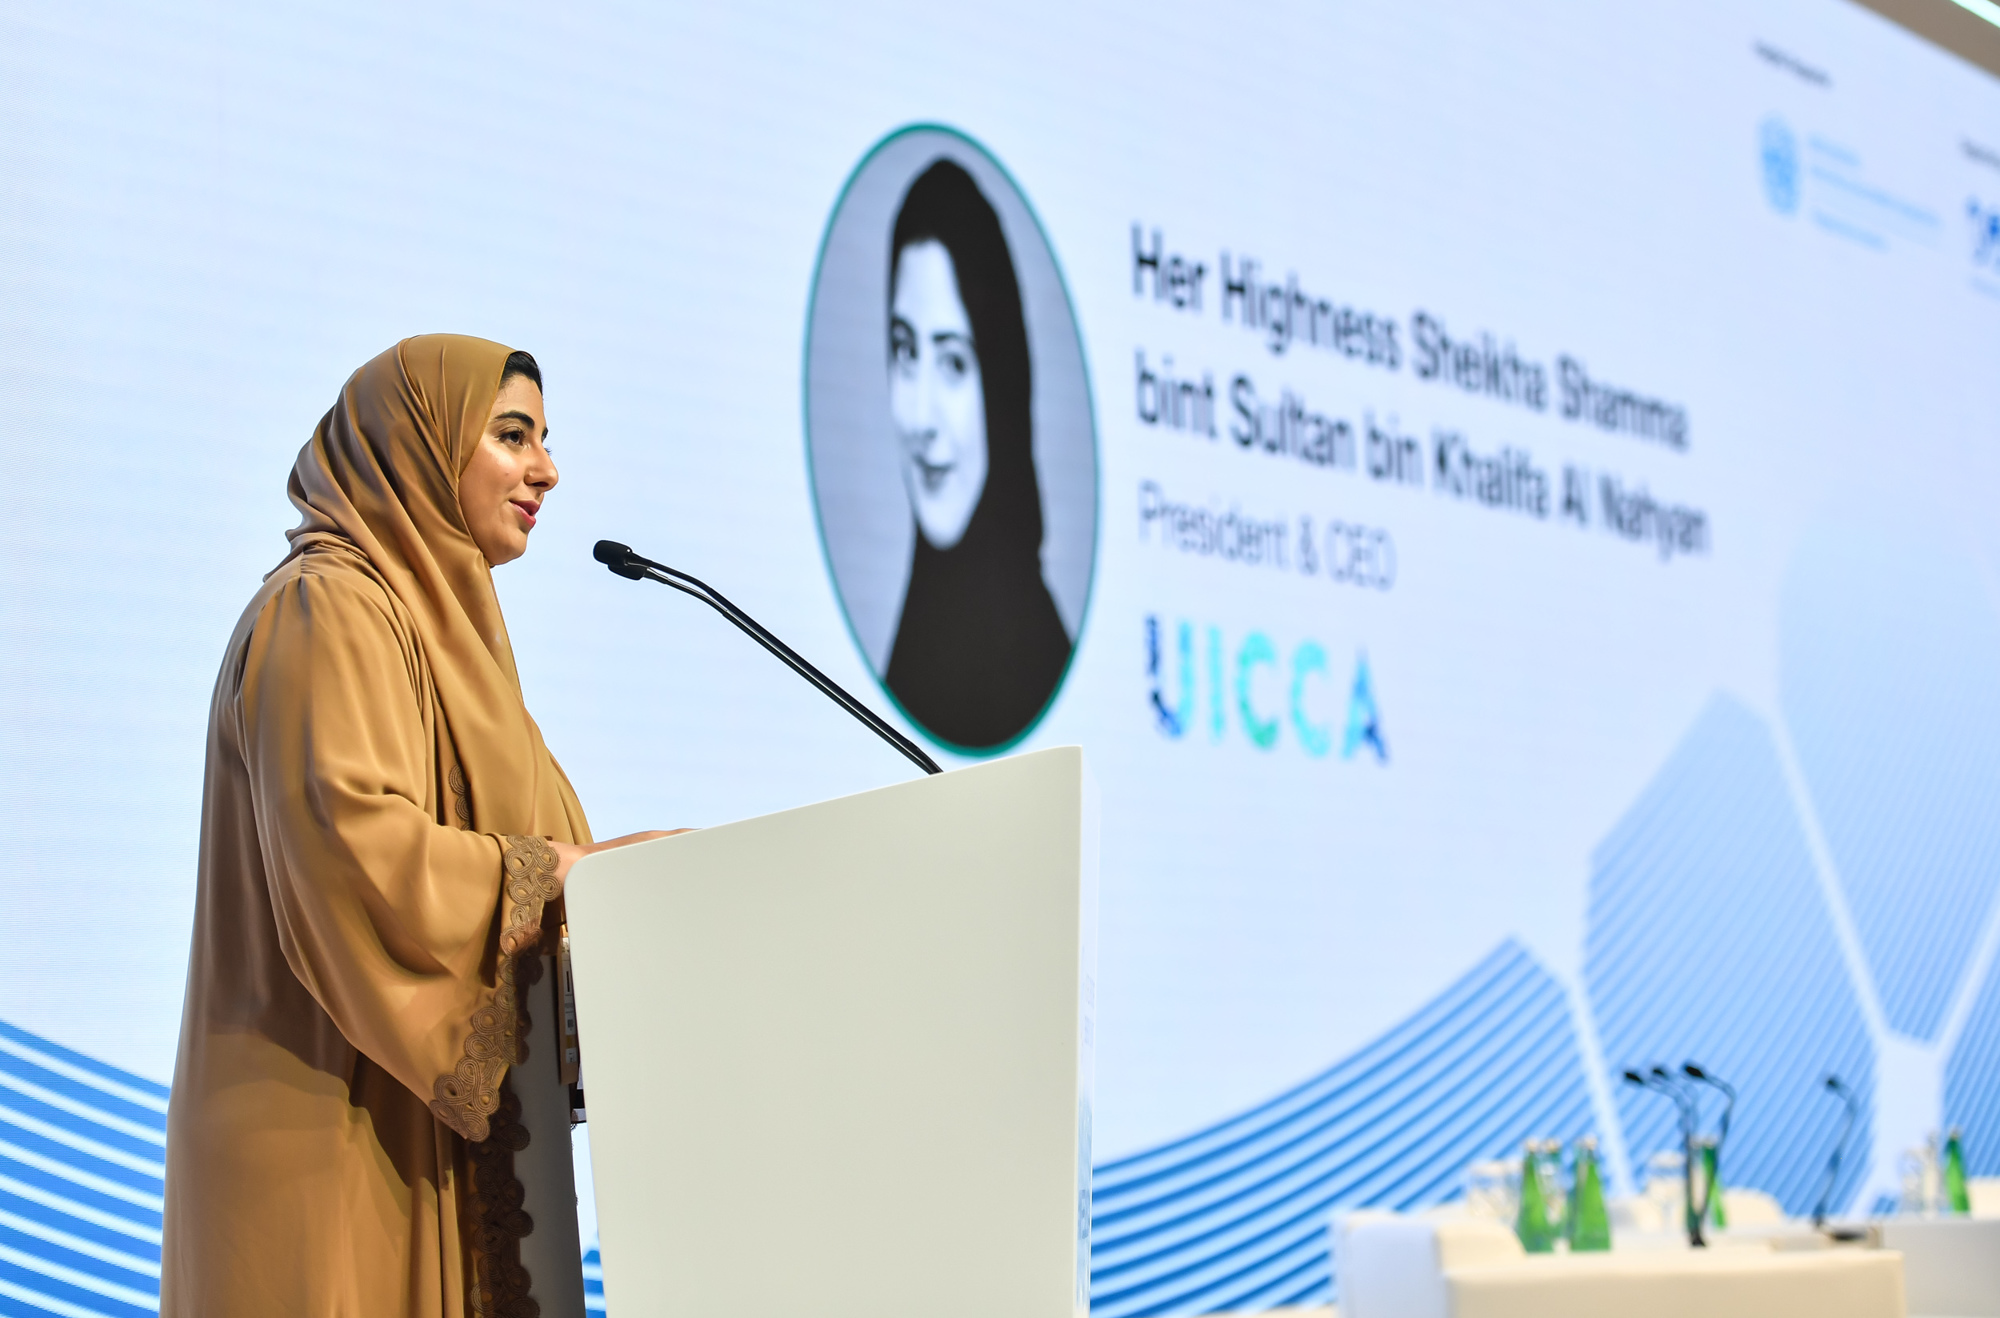 Her Highness Sheikh Shamma bint Sultan bin Khalifa Al Nahyan, president and CEO of the UAE’s Independent Climate Change Accelerators, warns “action cannot take place if we work in silos”